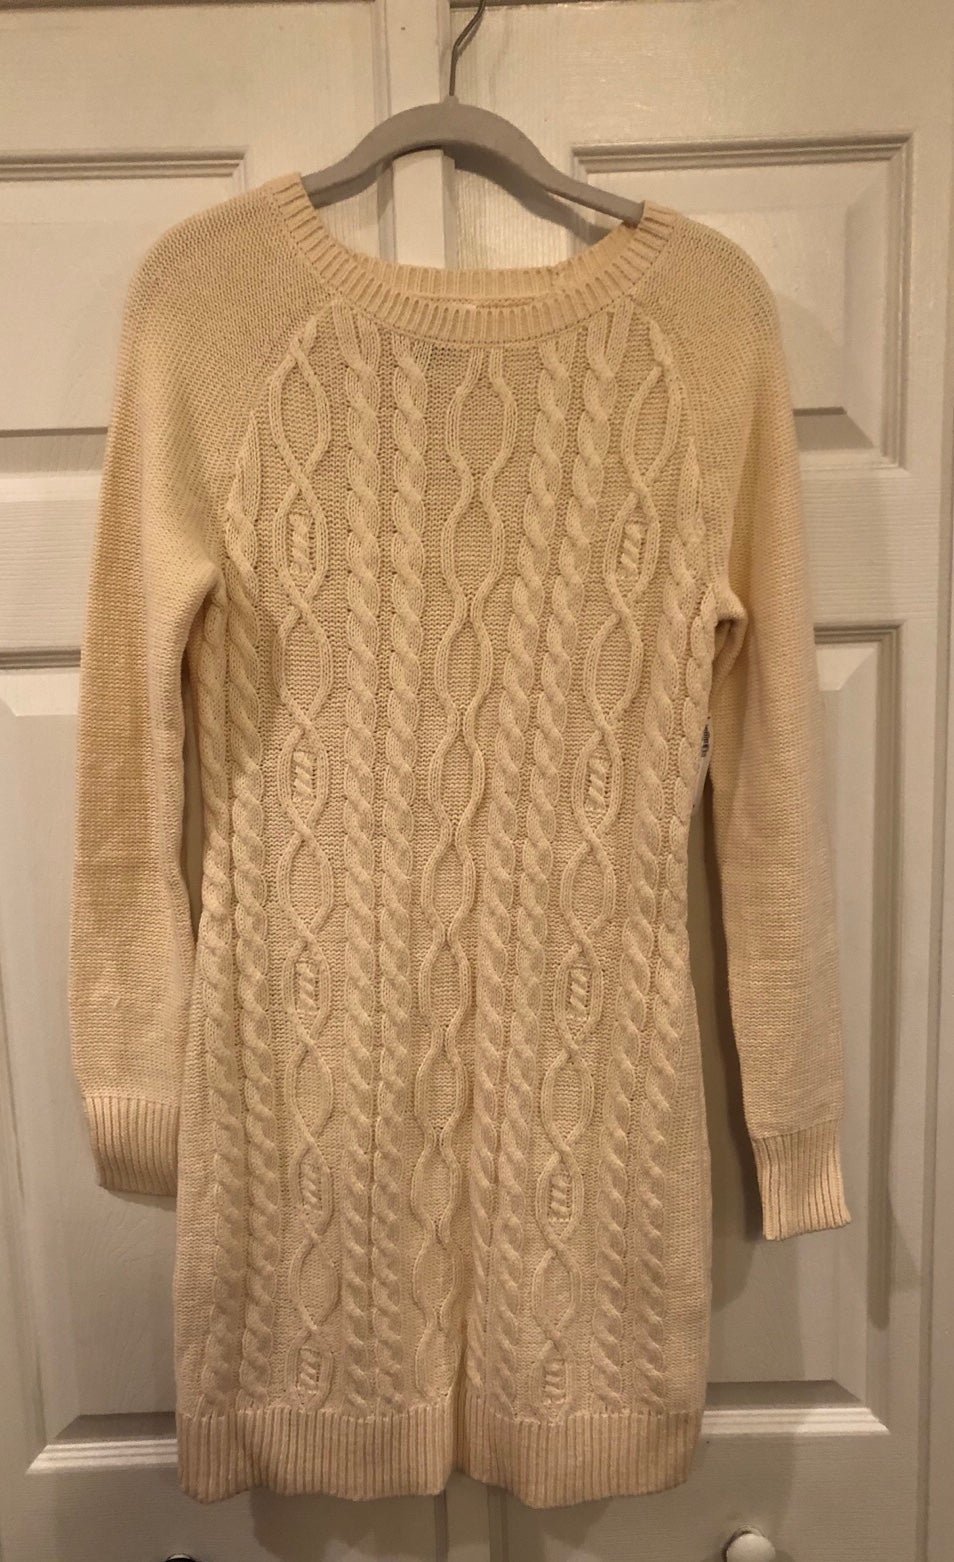 good price NWT - Cream Cable Knit Sweater Dress - Size 